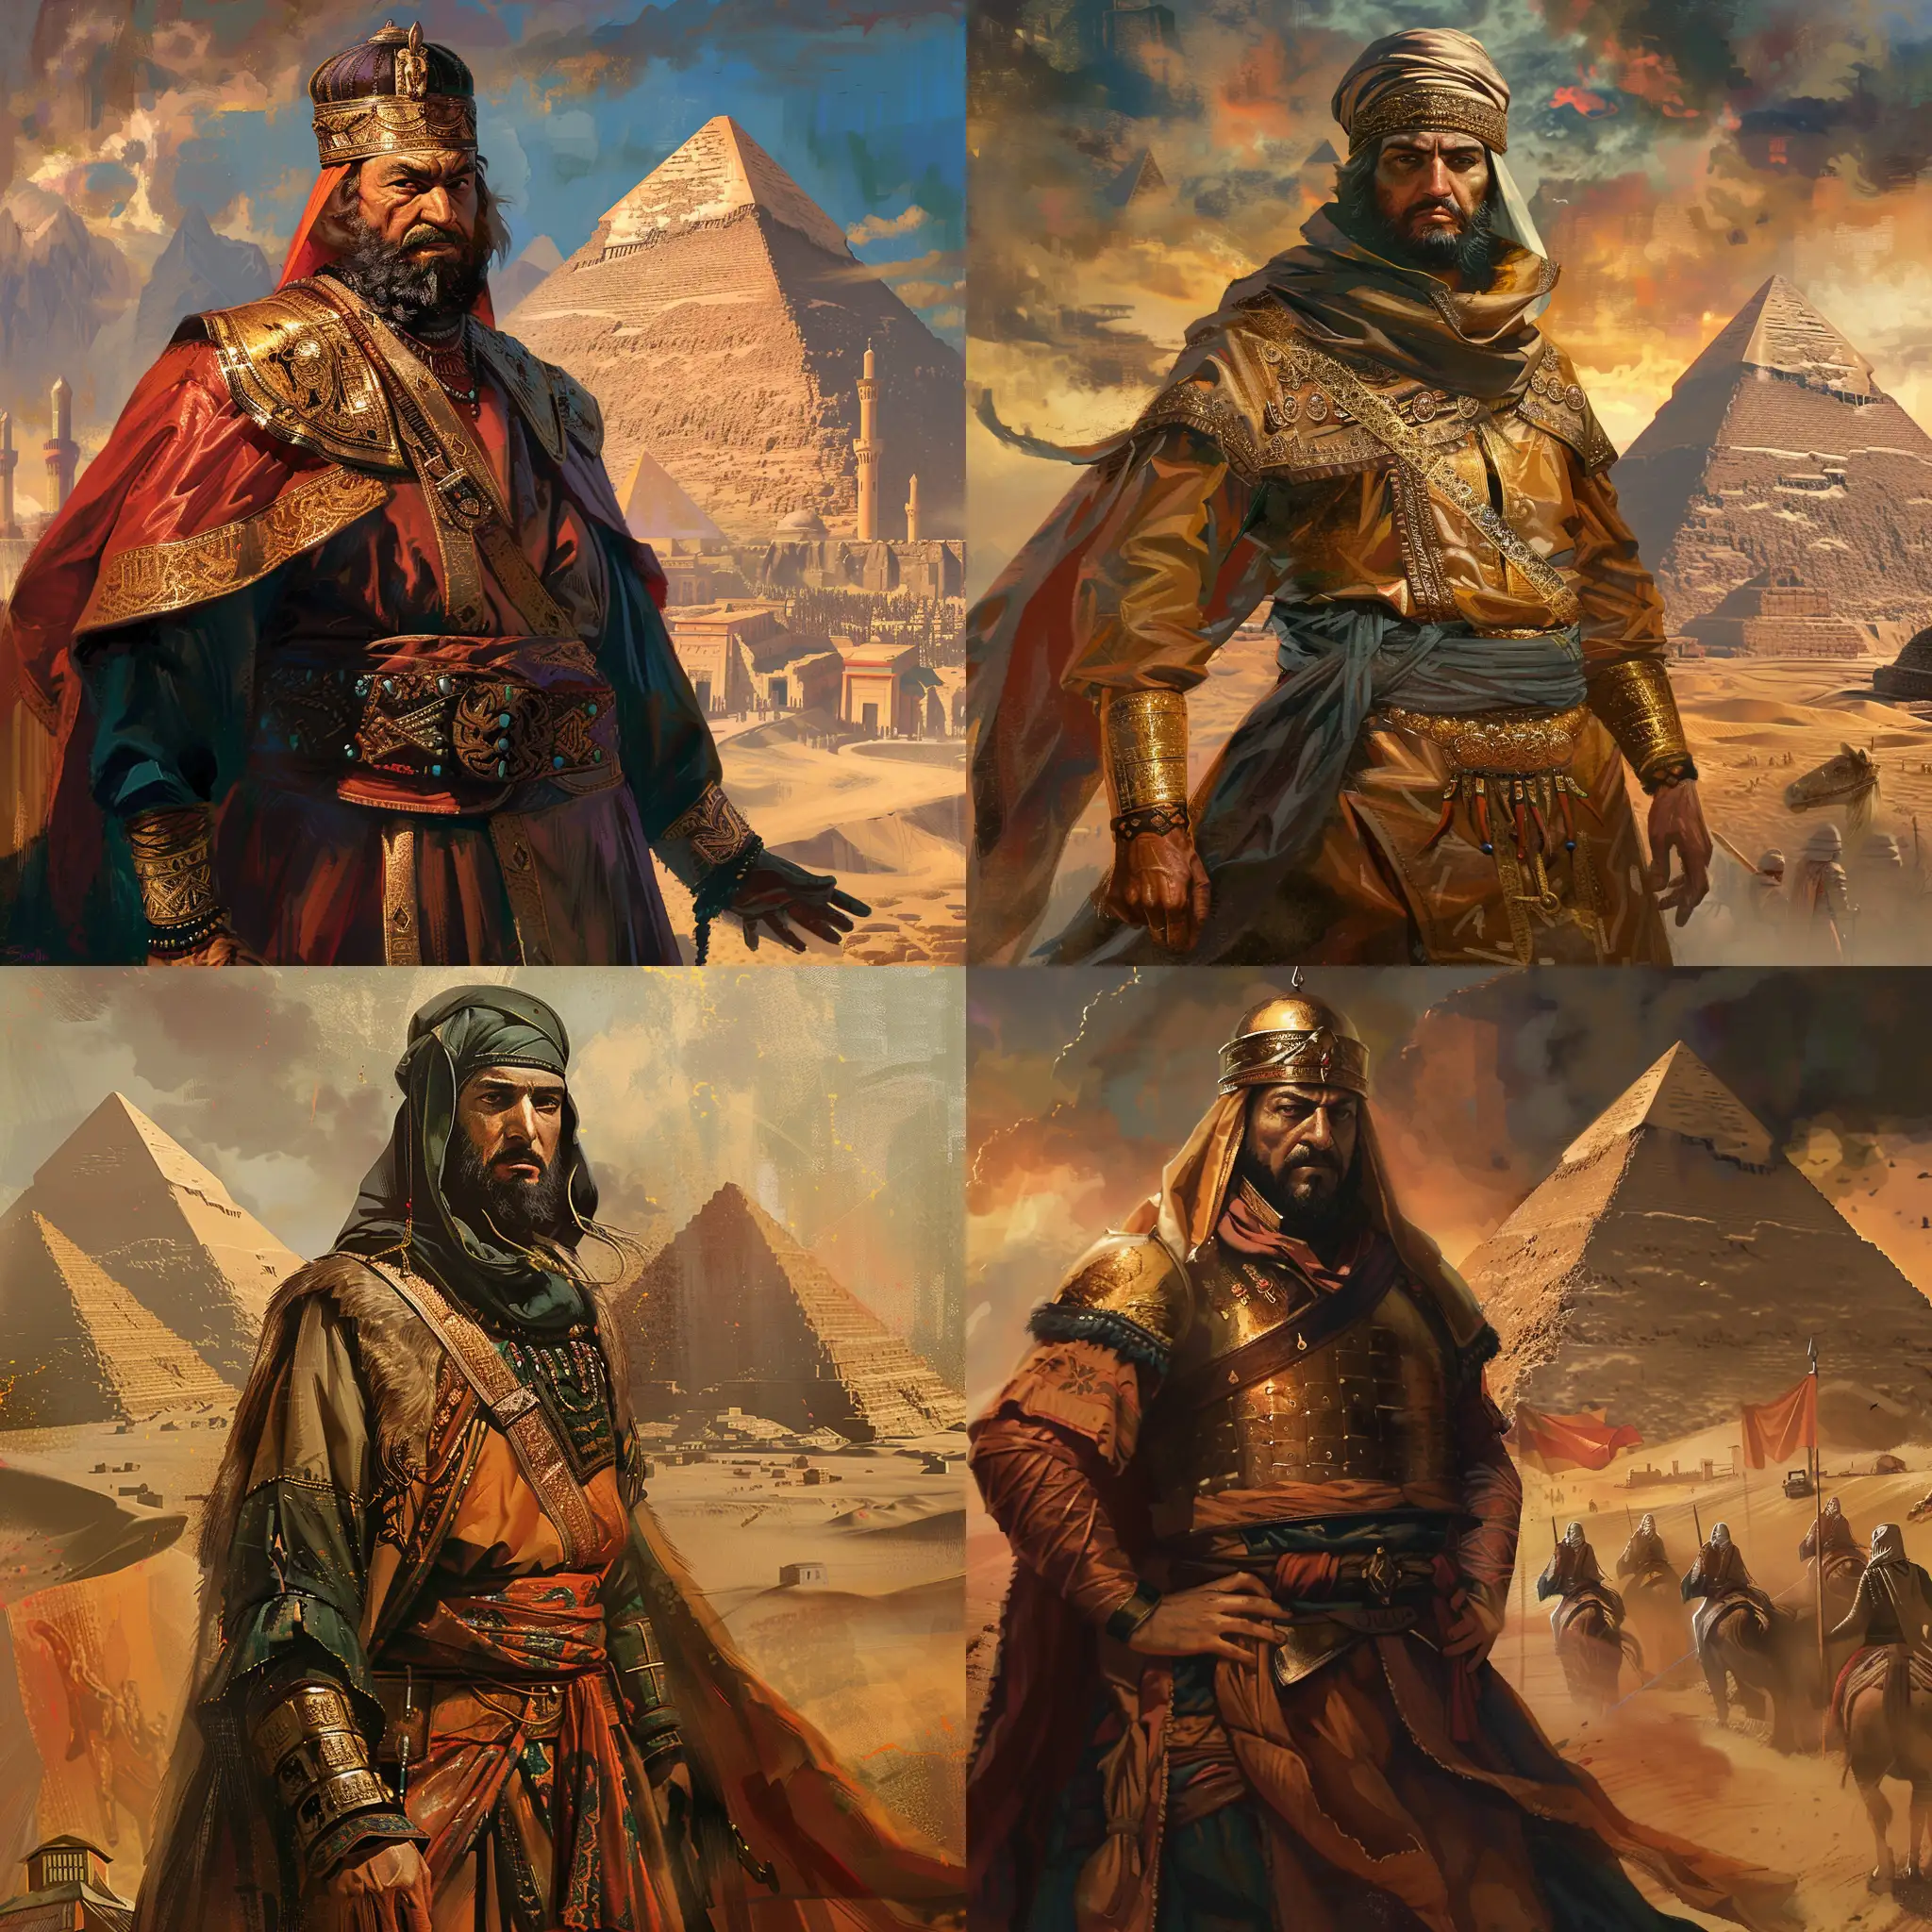 Qutuz, the Muslim leader who defeated the Mongols, standing in front of Egypt, artistic style